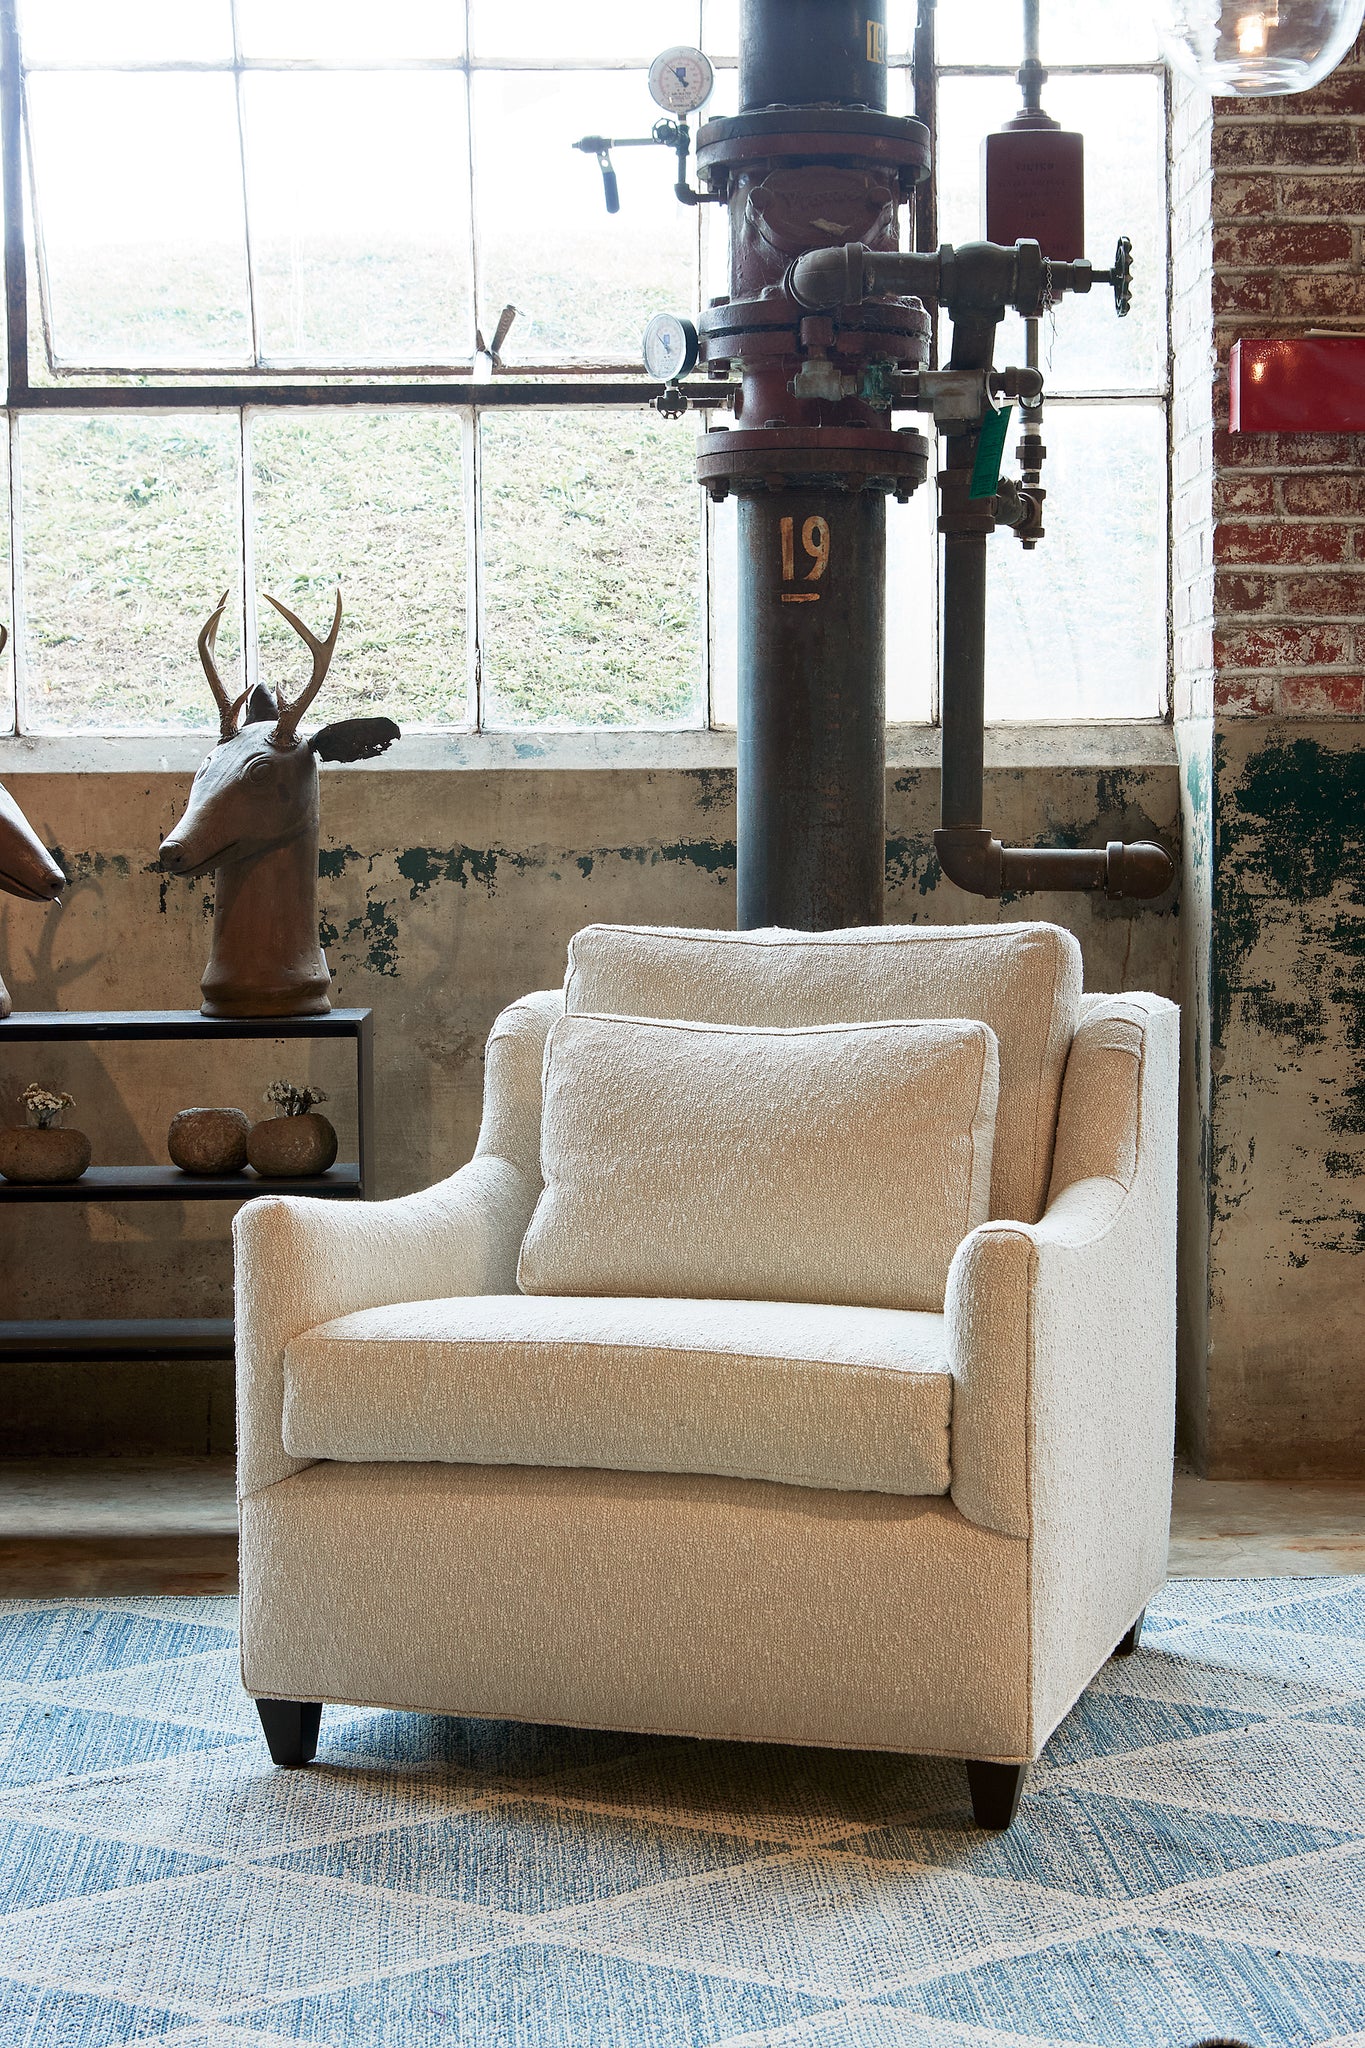  Milo chair in Segura Natural next to a dark credenza with a decorative deer on top. In the background is a brick wall with an industrial pipe. Photographed in Segura Natural. 